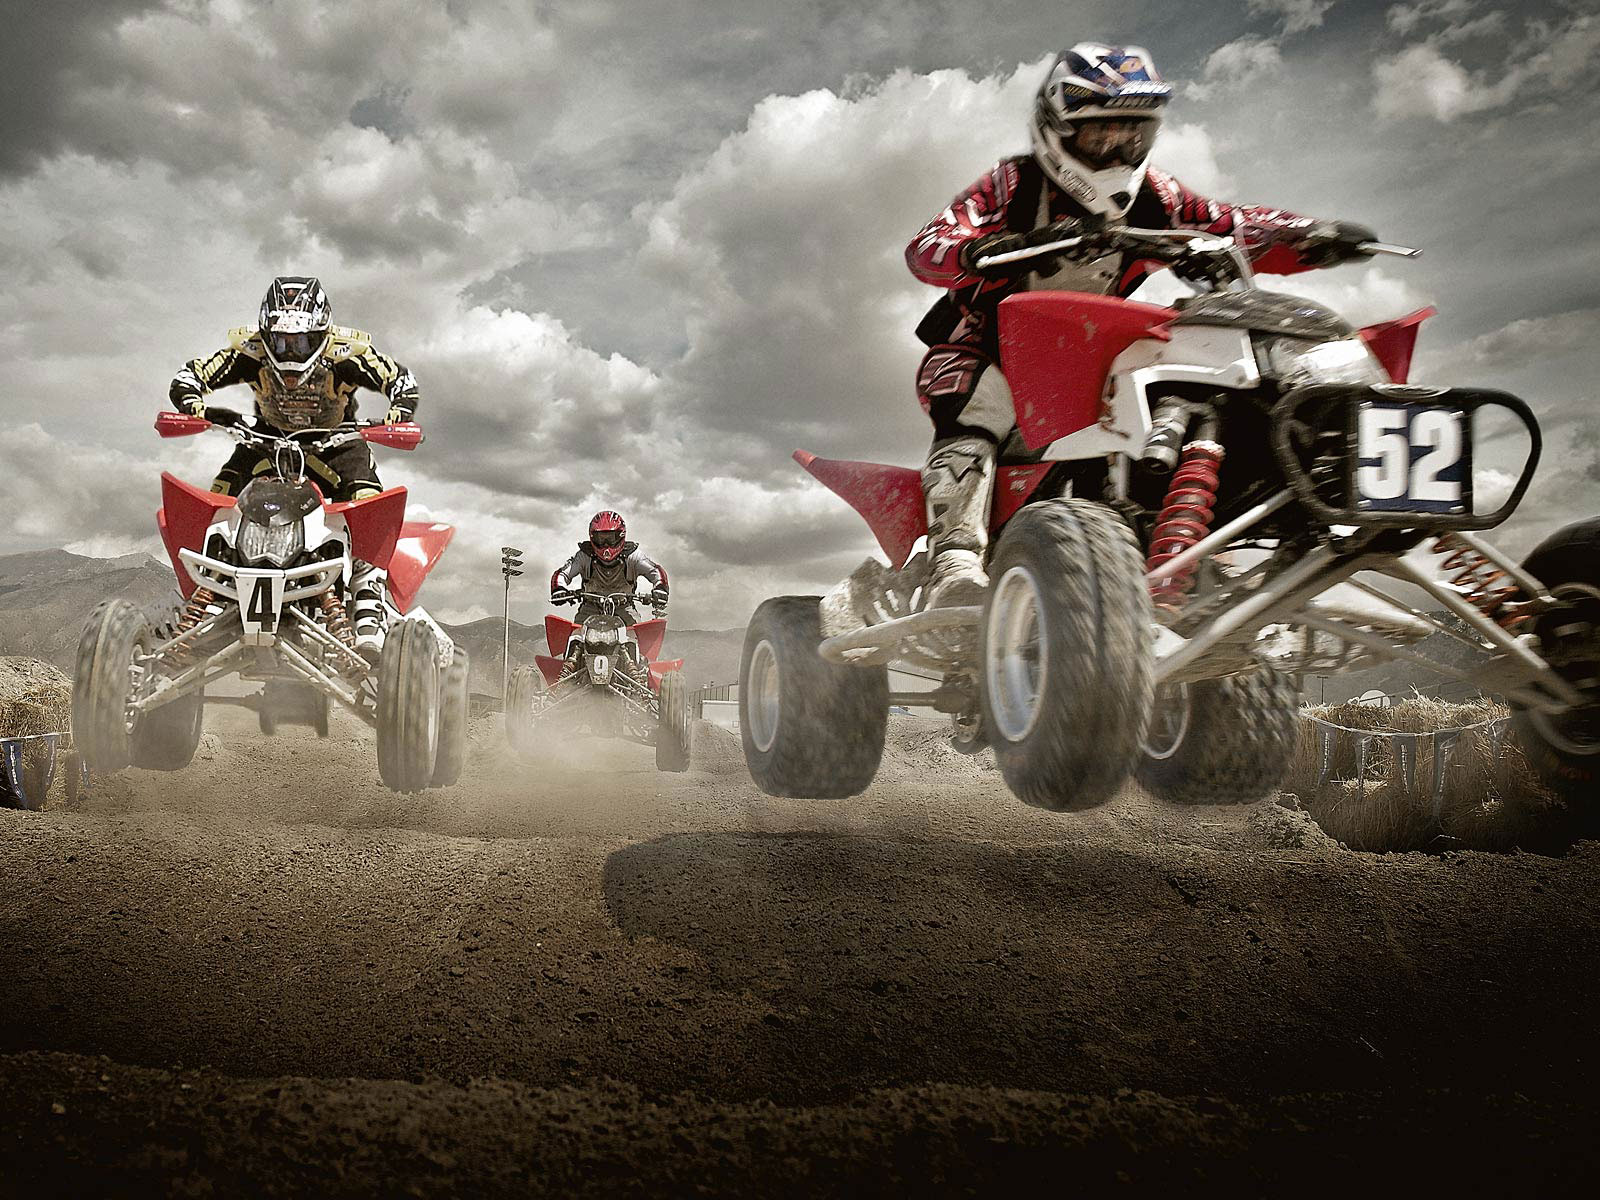 polaris, Outlaw, Atv, Quad, Offroad, Motorbike, Bike, Dirtbike, Race, Racing Wallpapers HD / Desktop and Mobile Backgrounds